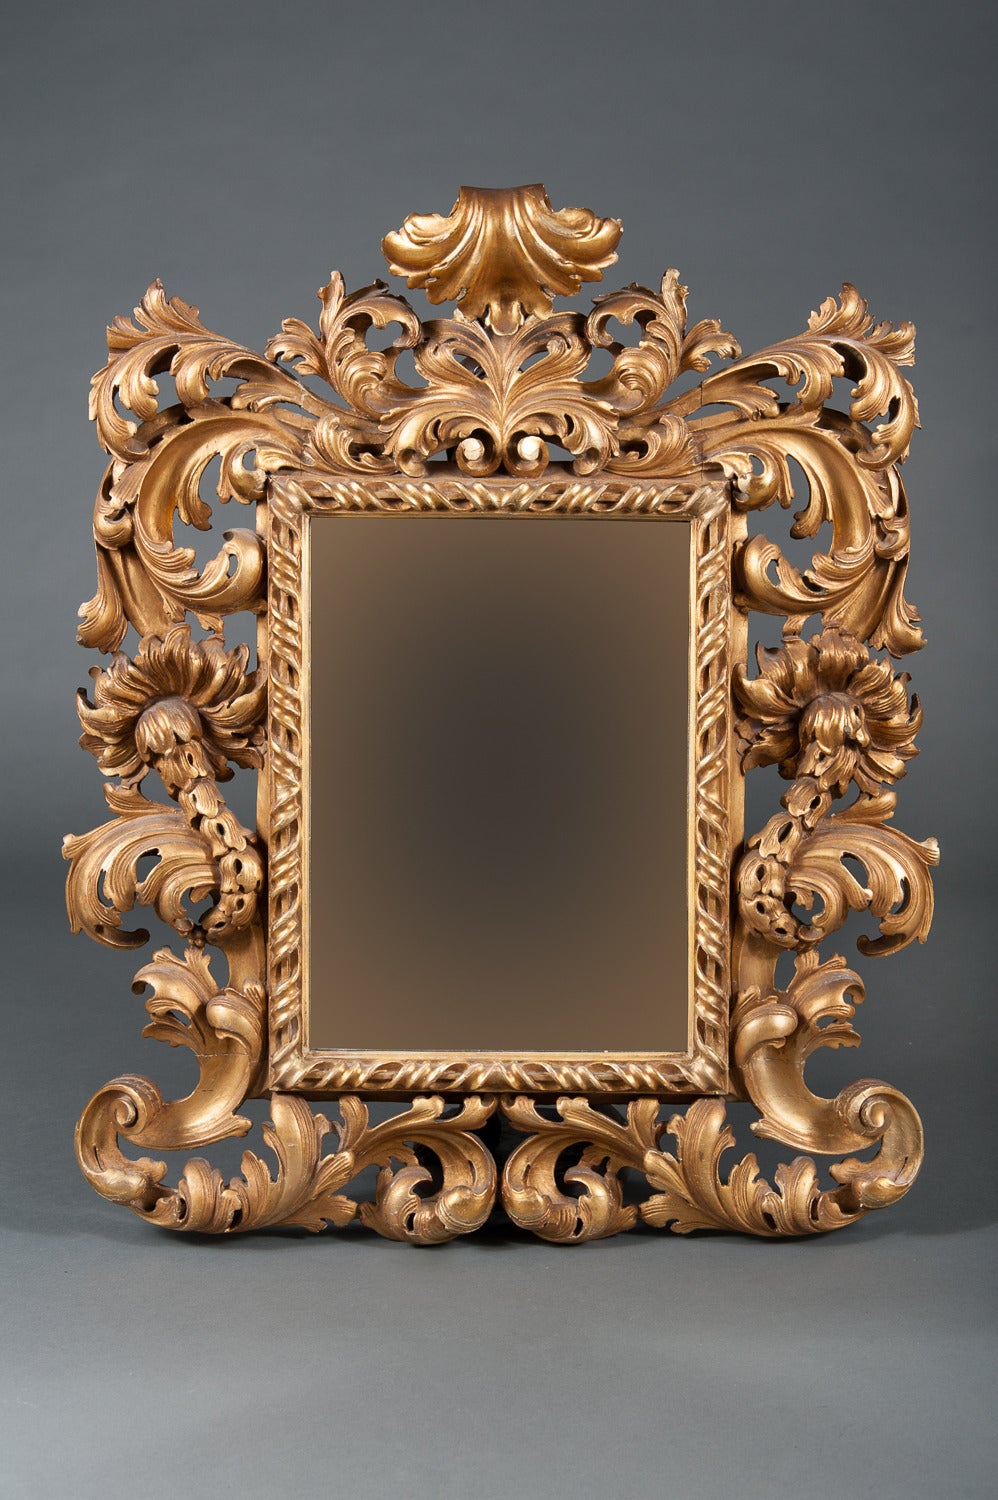 An Intricate 19th Century French Giltwood Rococo Style Vanity or Wall Mirror

Circa 1880
 
Origin: French 

Depth: 4